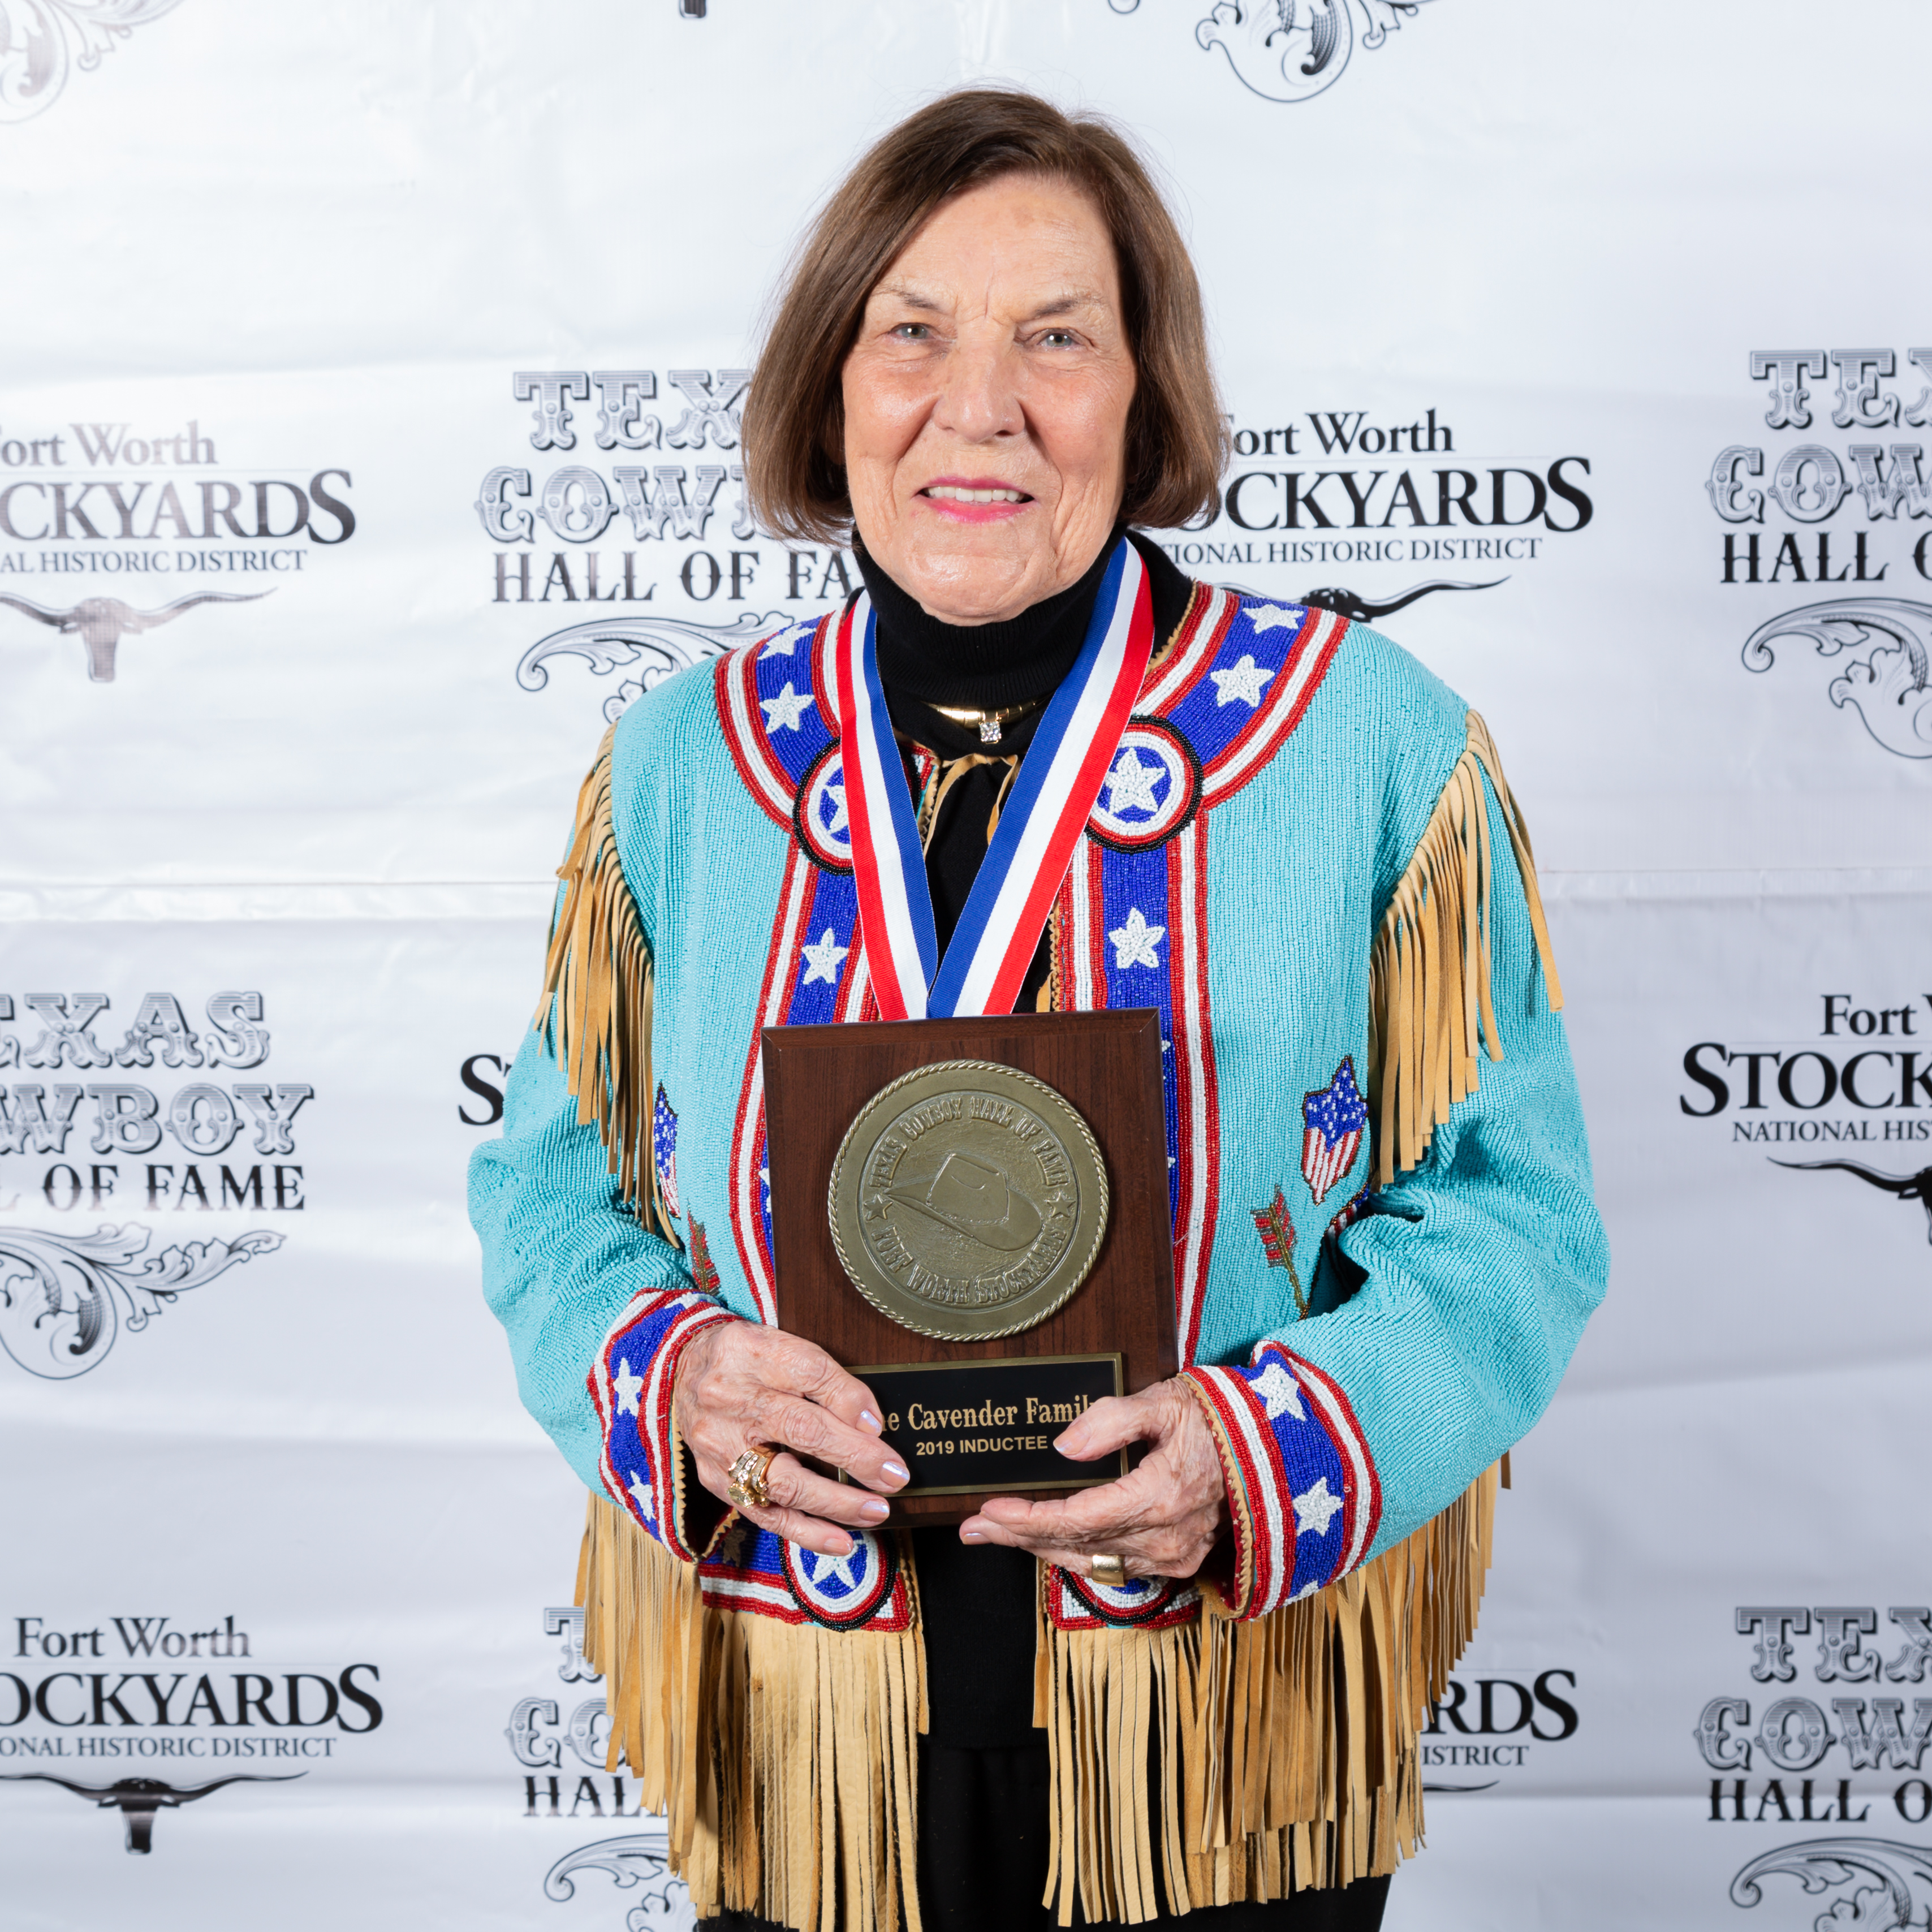 The Cavender Family inducted into the 2019 Texas Cowboy Hall of Fame